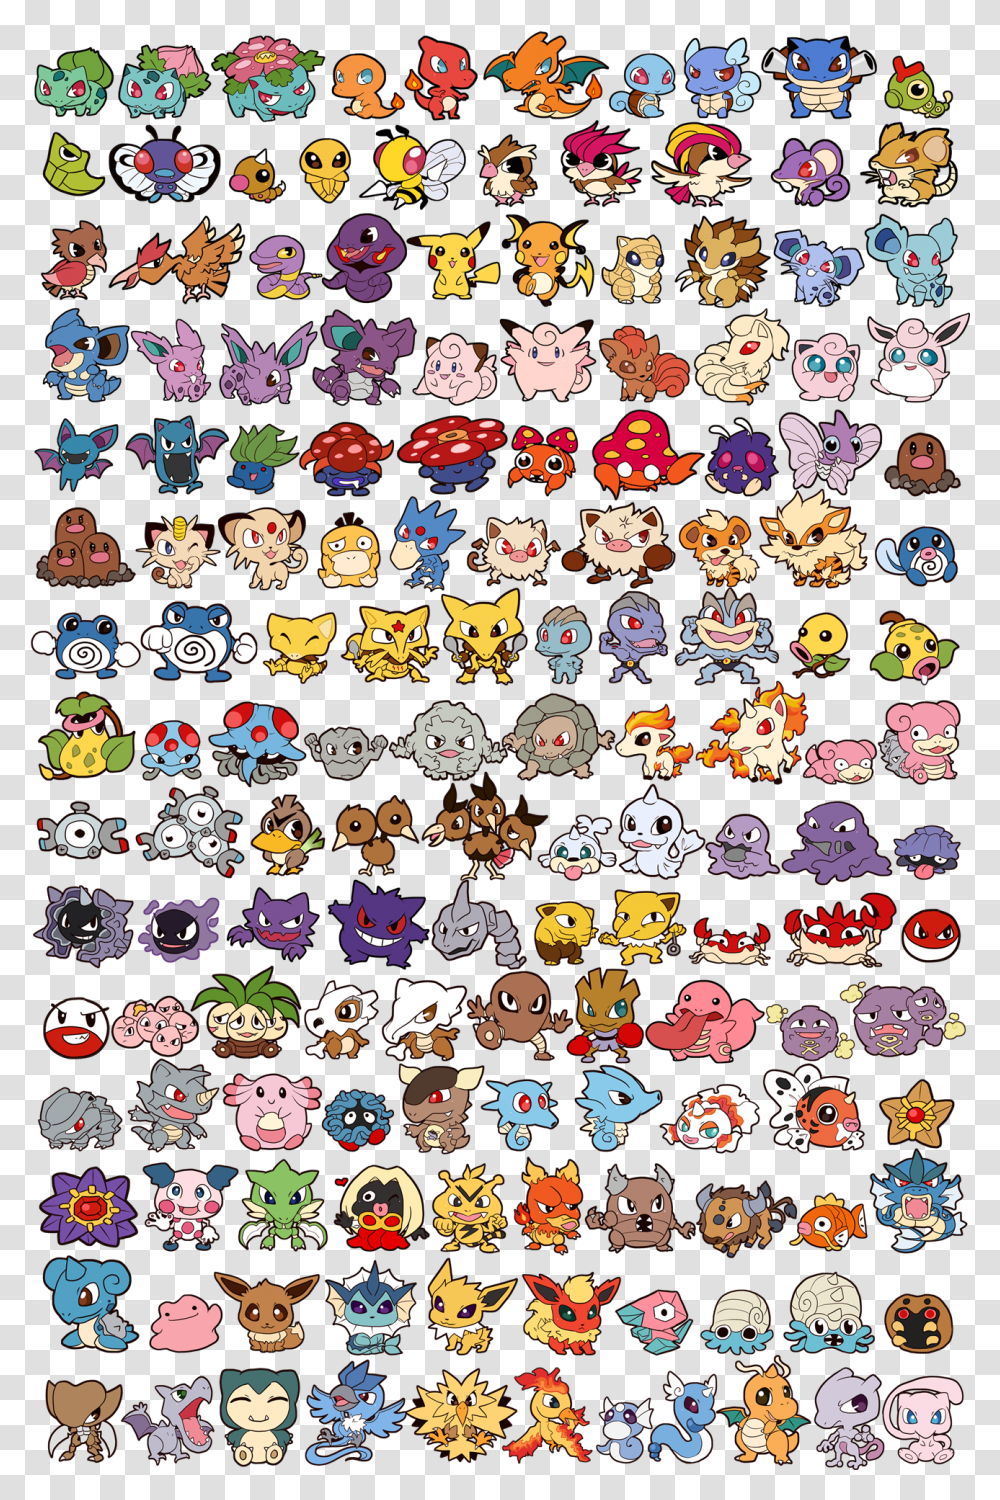 Cute Pokemon And Mewtwo Pokemon All Kanto Pokemon, Rug, Pattern, Quilt, Angry Birds Transparent Png